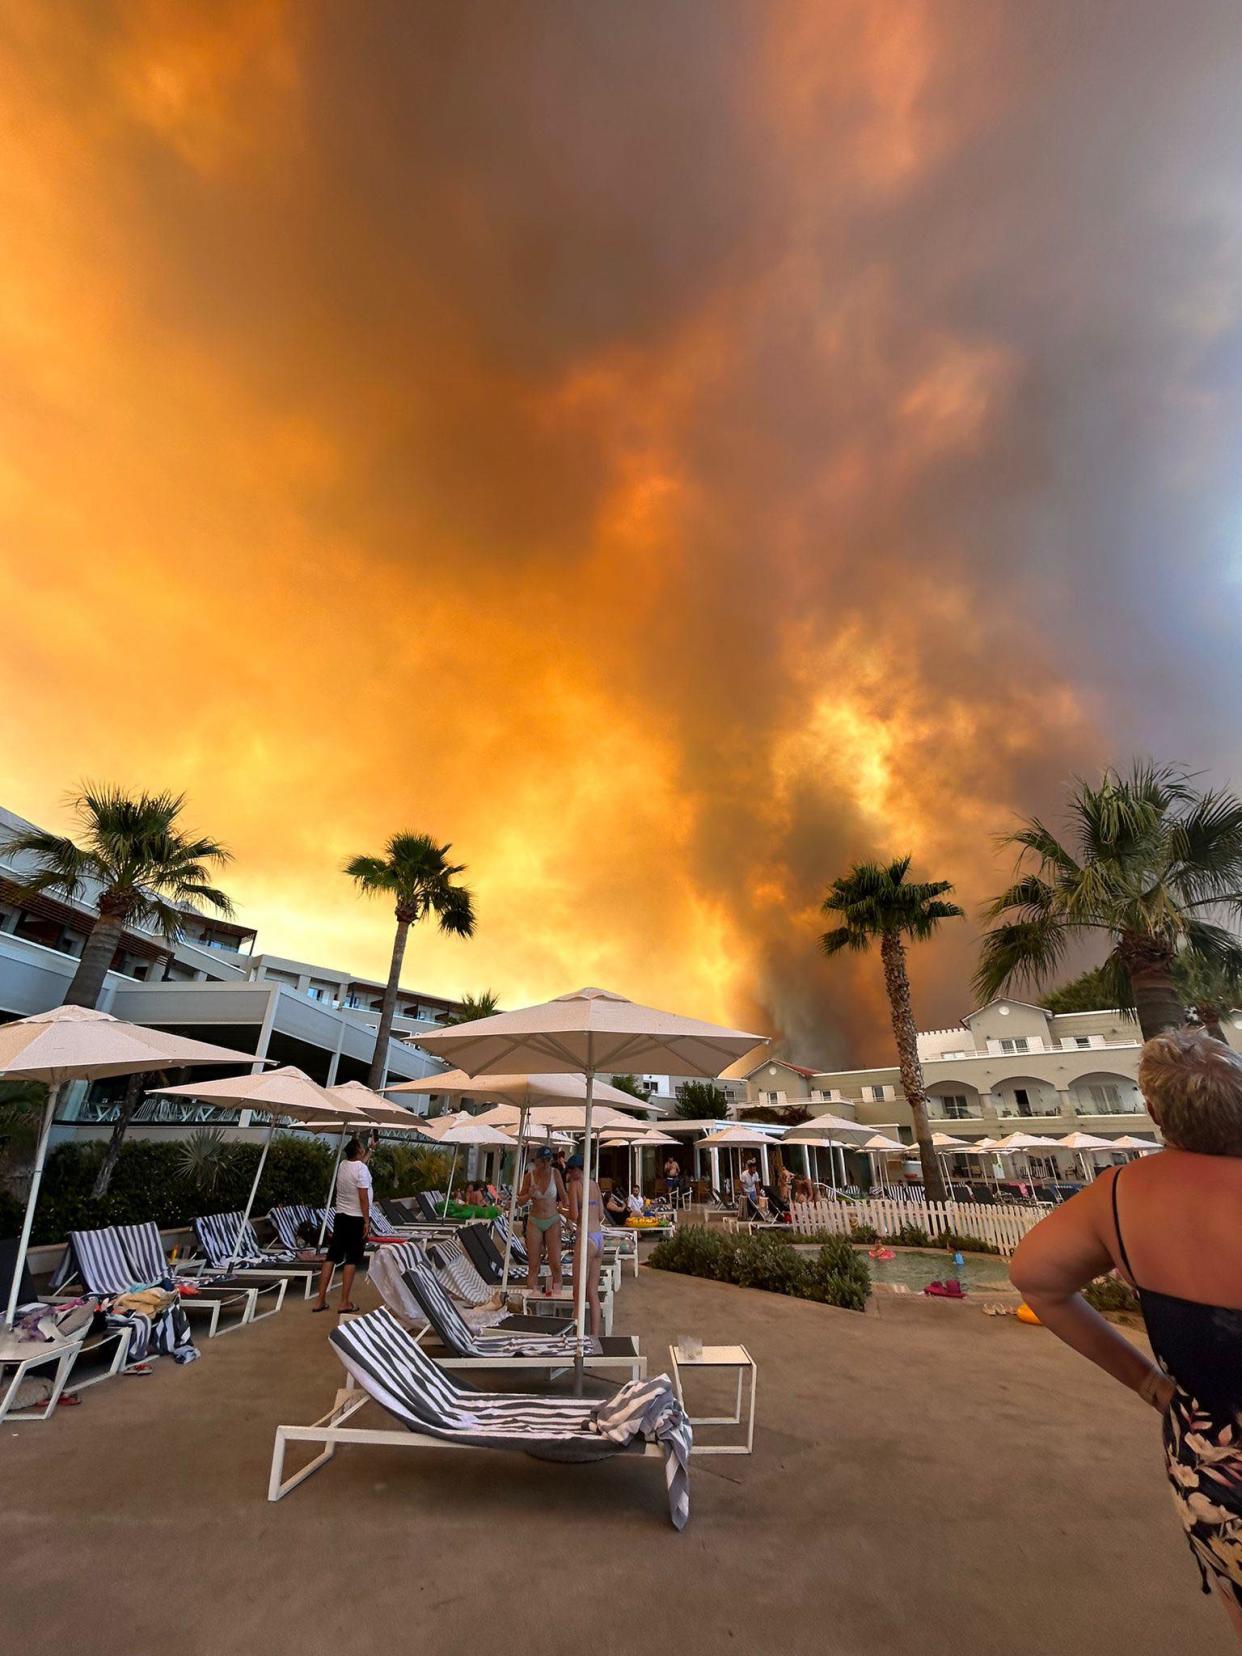 A British tourist has spoken of a “traumatic” escape from her hotel in Rhodes, which she was told was hours later caught alight in the wildfires spreading across Greece (Demi Kemp)